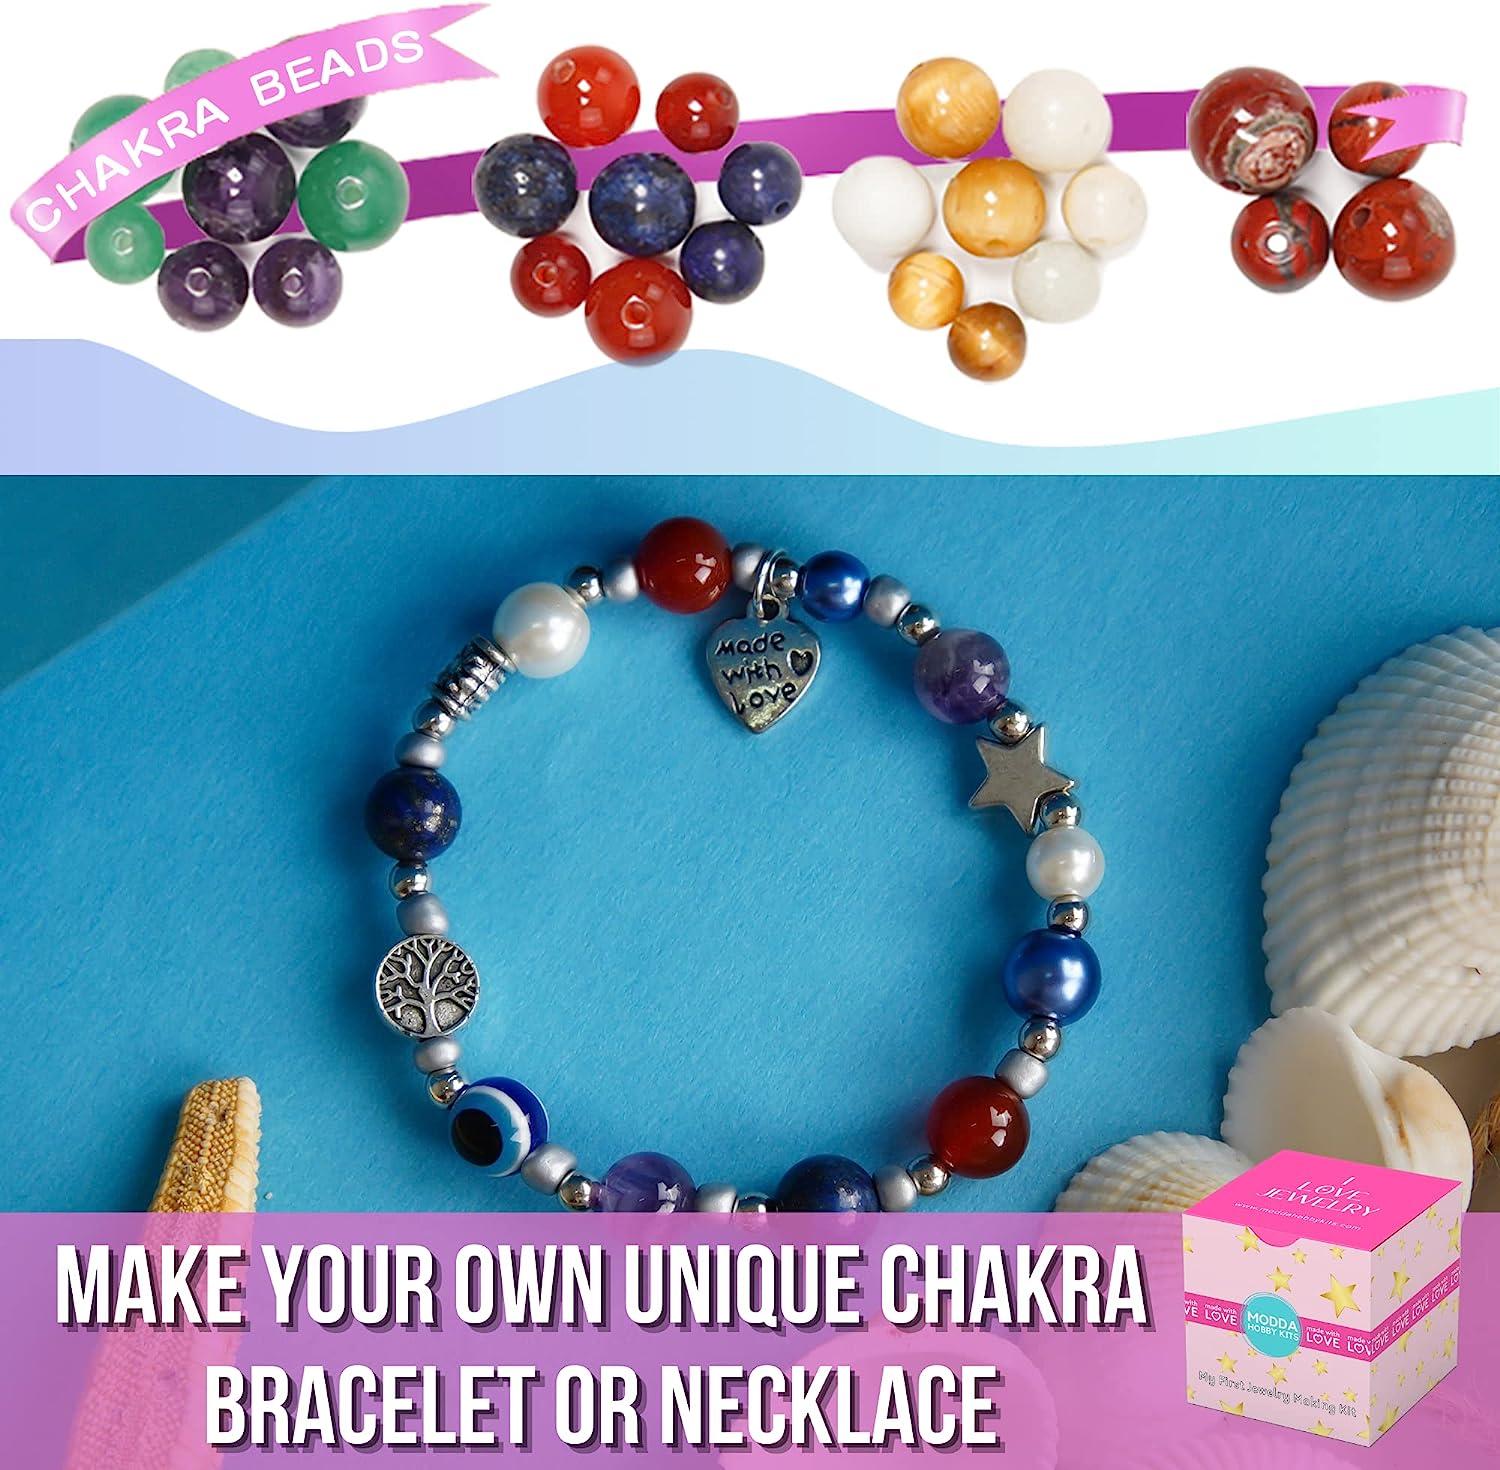 MODDA Deluxe Jewelry Making Kit with Video Course, Includes Instructions,  Beads, Necklace, Bracelet, Earrings Making, Crafts for Adults, Beginners